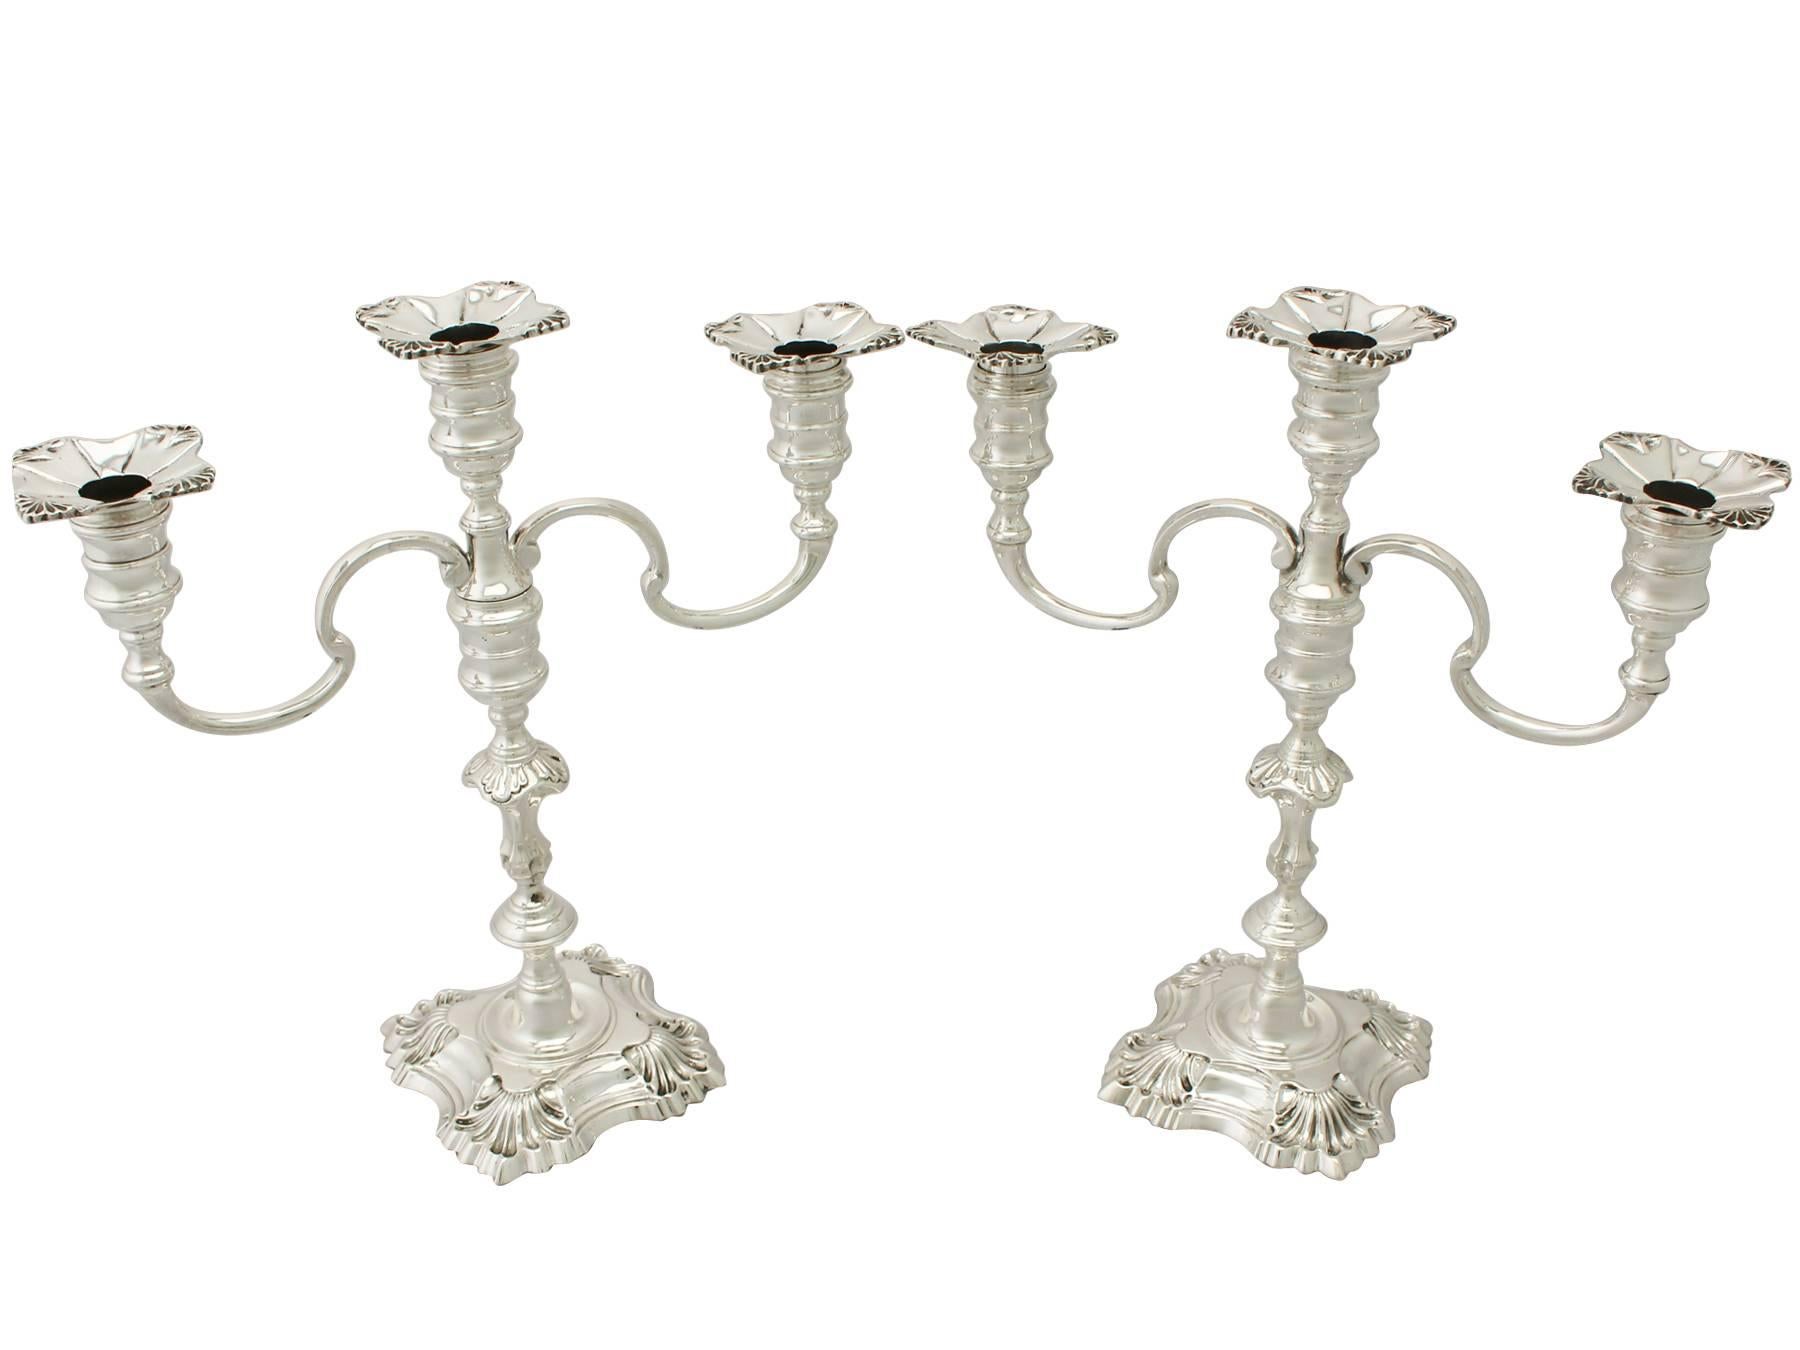 An exceptional, fine and impressive pair of vintage Elizabeth II English cast sterling silver three-light candelabra; an addition to our ornamental silverware collection.

These exceptional vintage Elizabeth II sterling silver candelabra have a